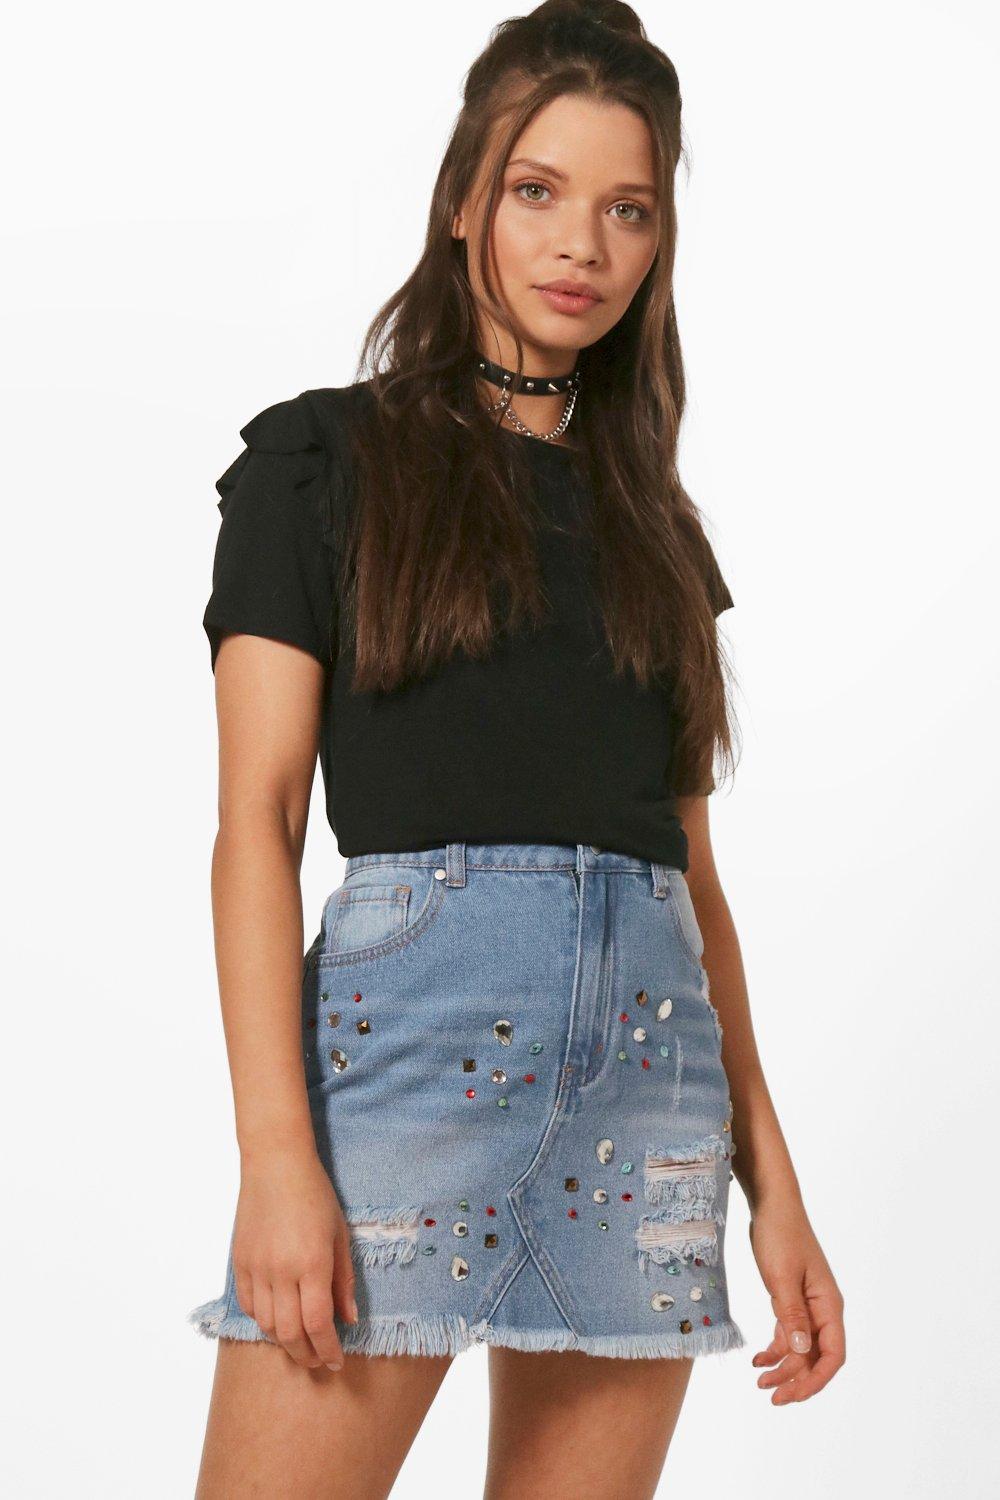 This is one of the cutest denim skirt outfits!